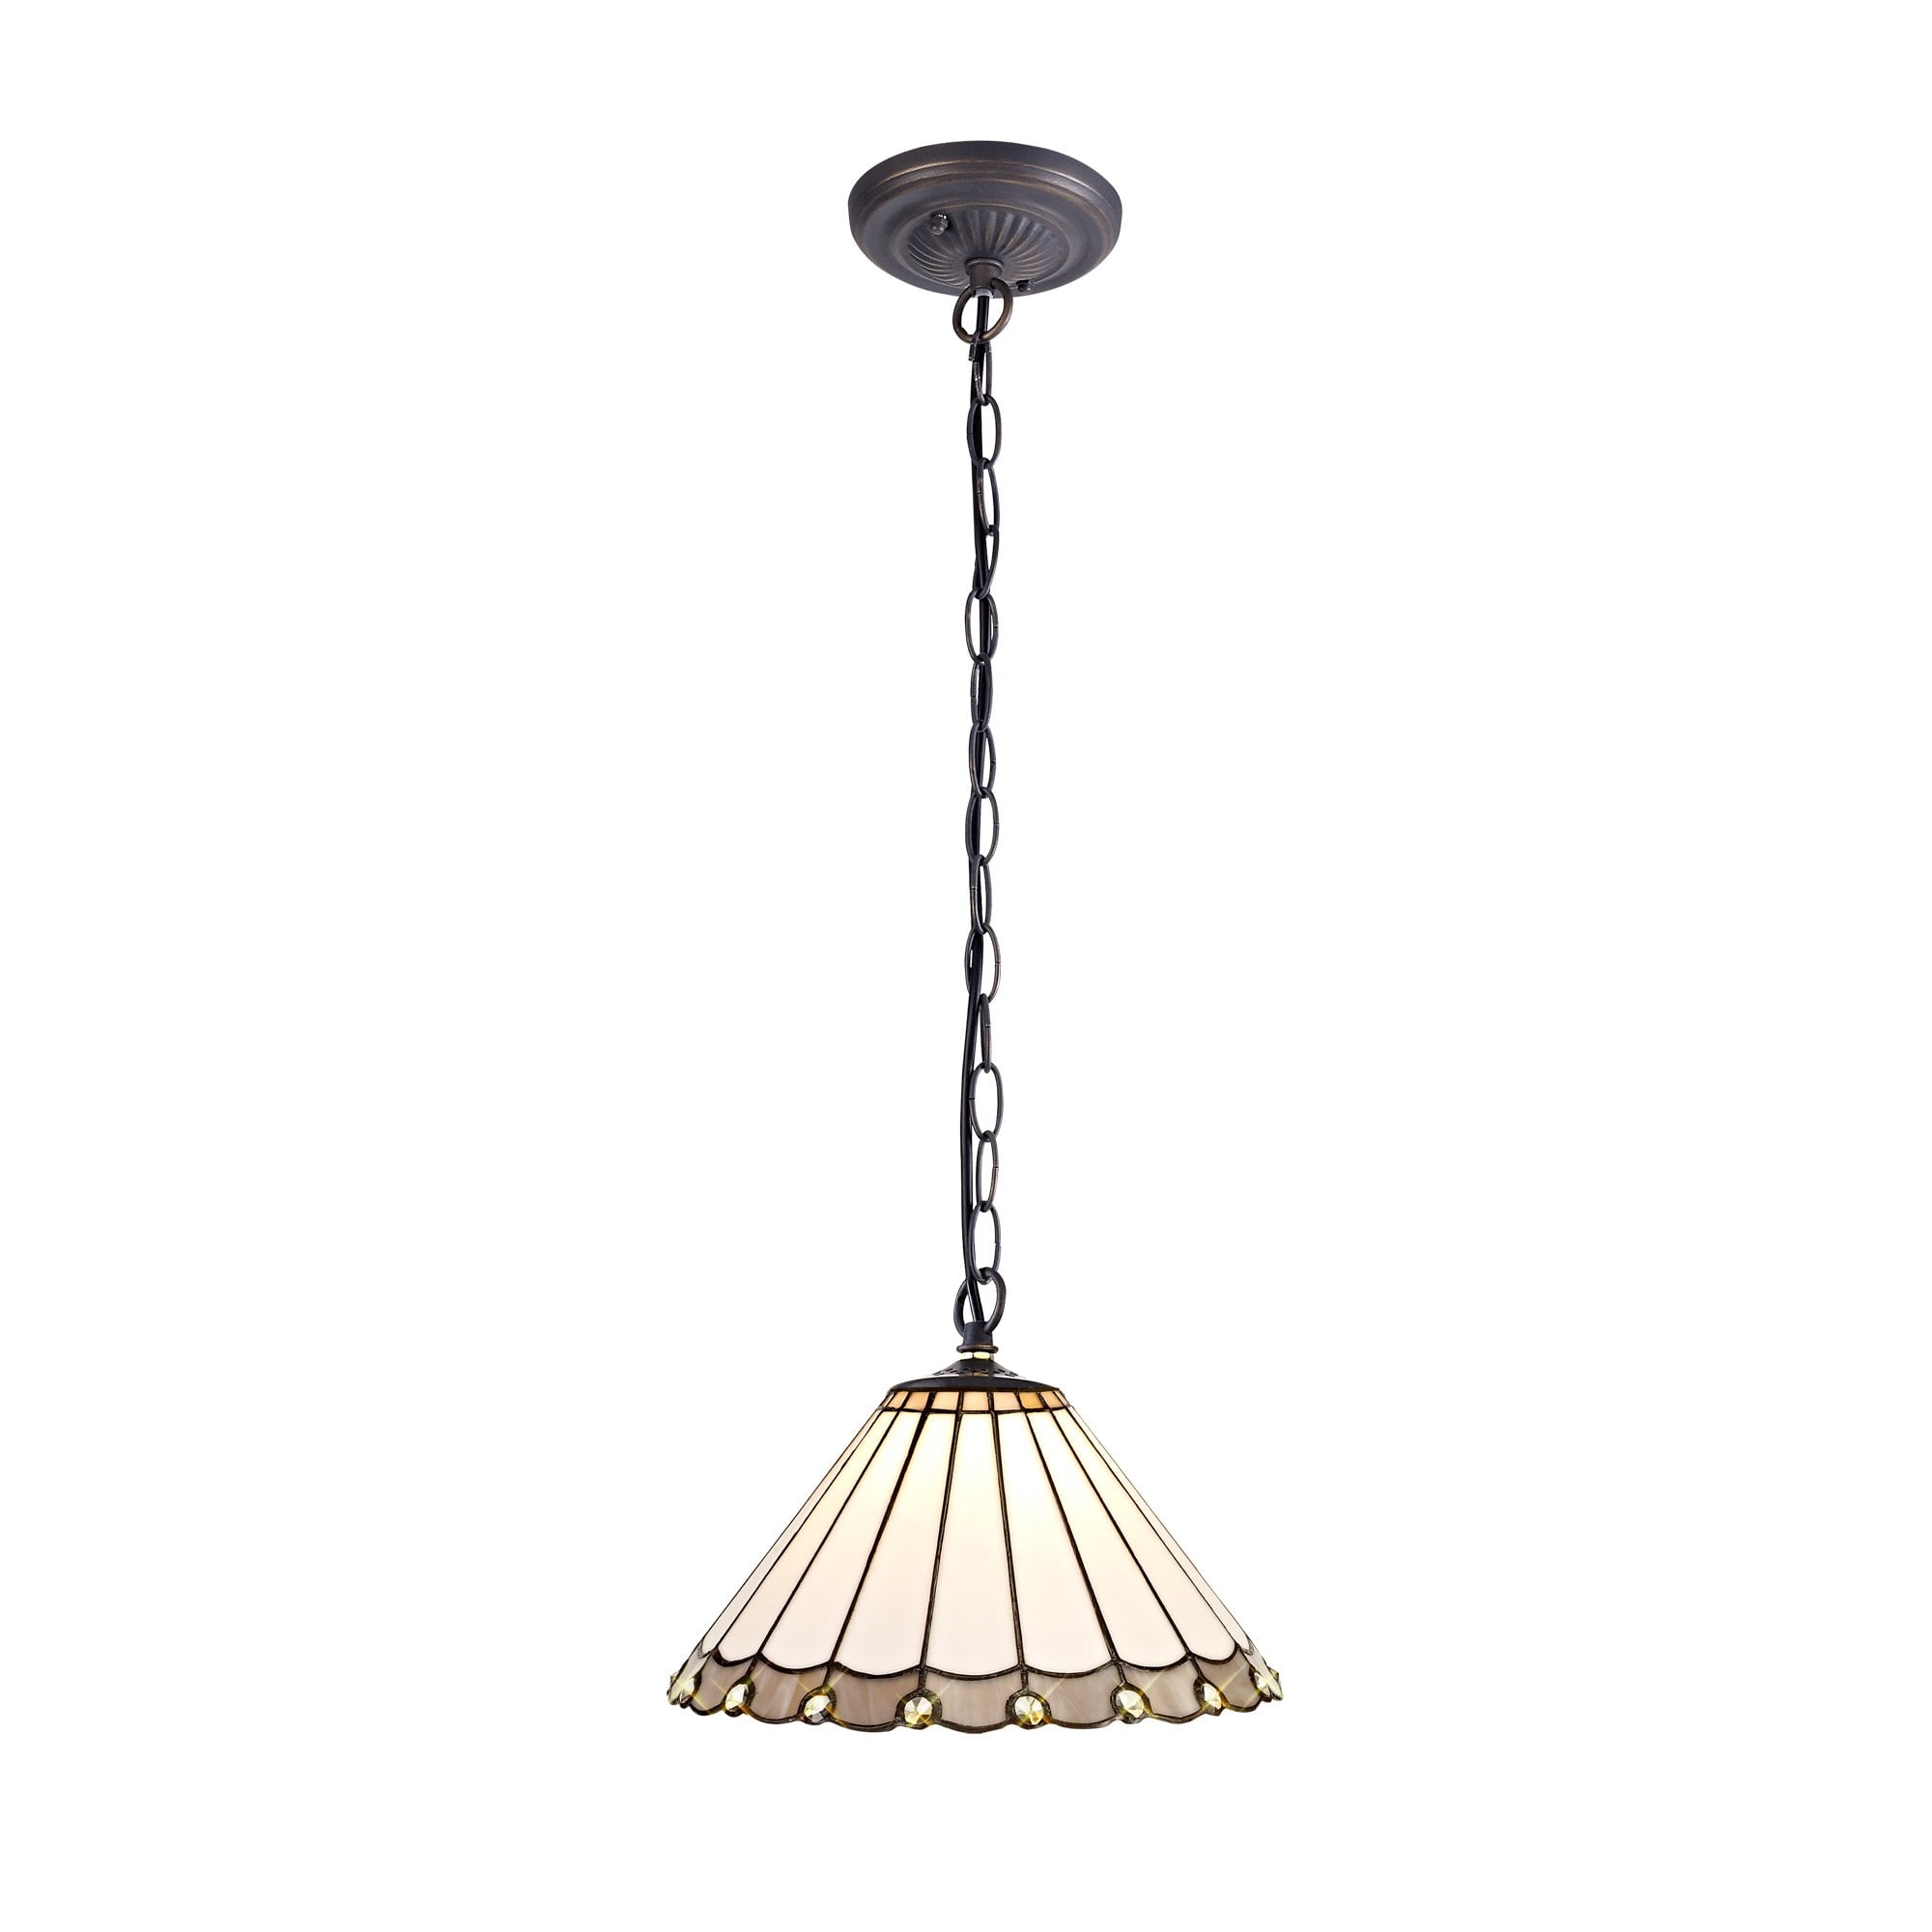 1 Light Downlighter Pendant E27 With 30cm Tiffany Shade, Grey/Cream/Crystal/Aged Antique Brass